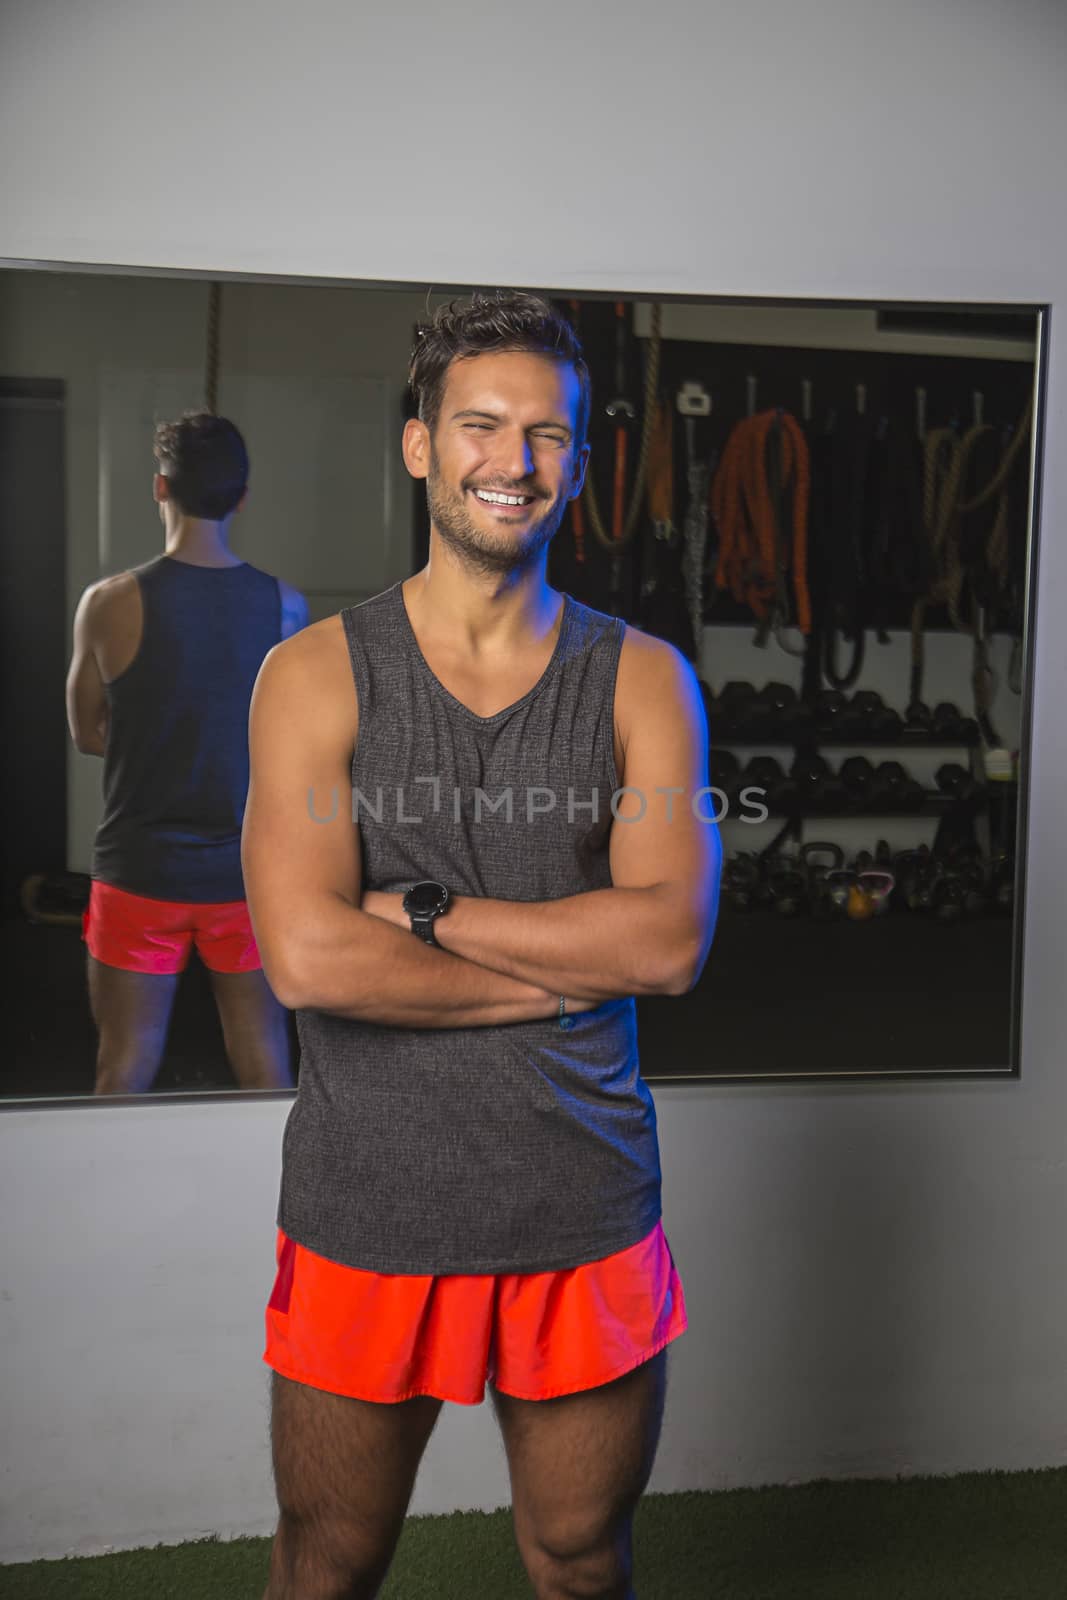 Smilling man in a gym by mypstudio